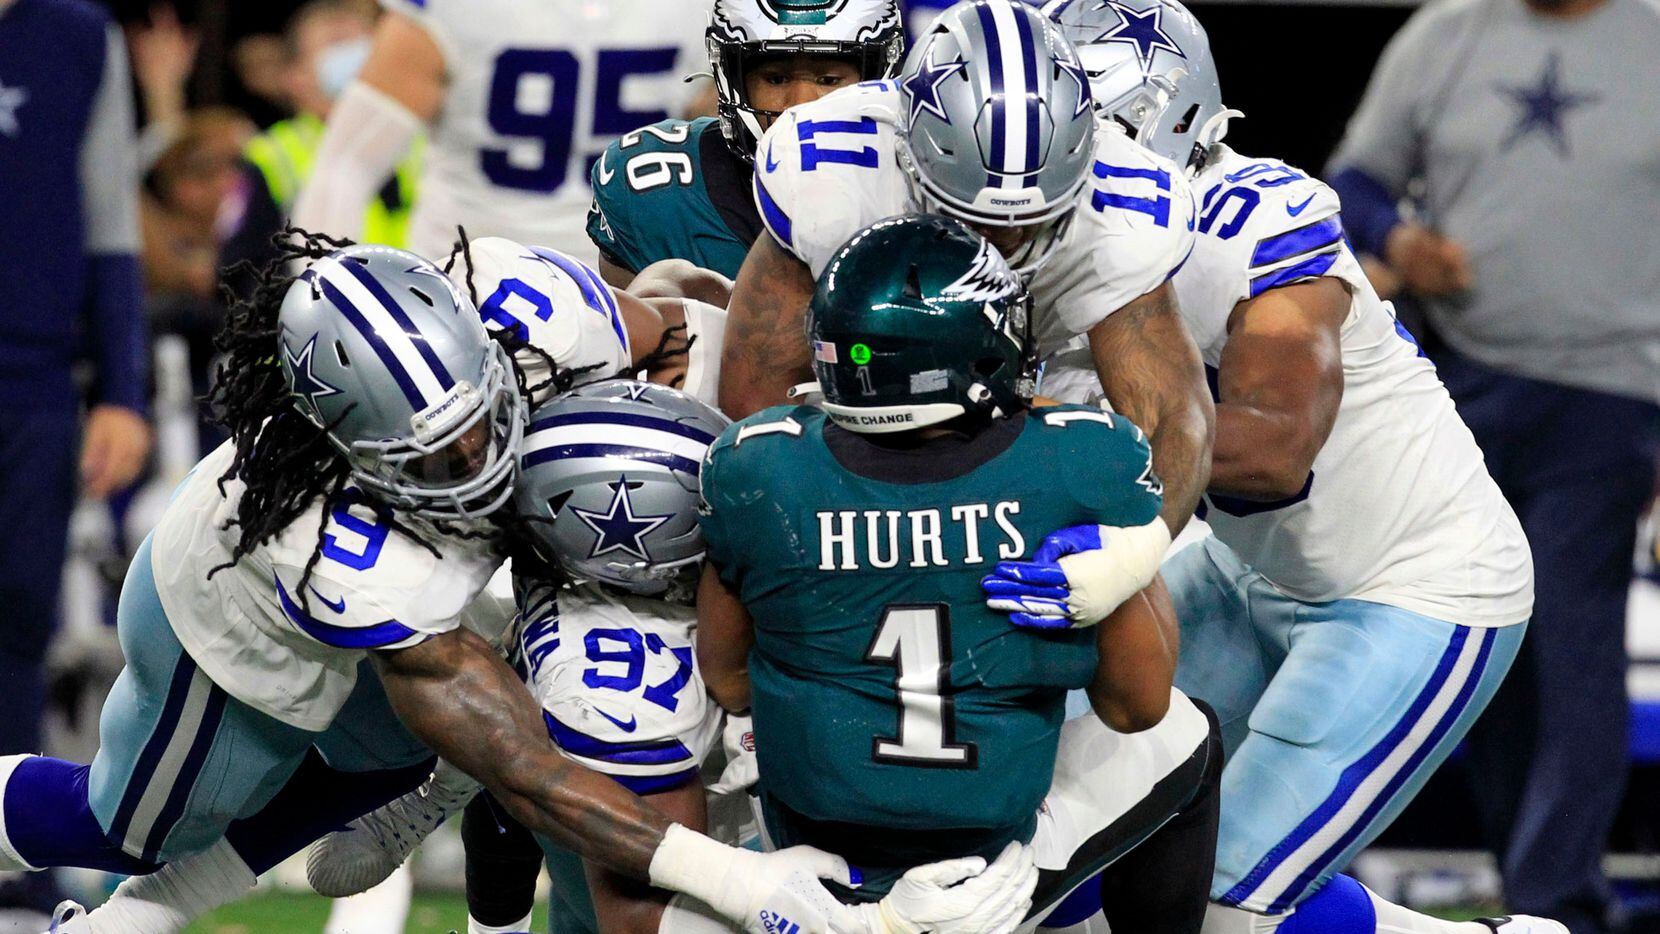 Philadelphia Eagles quarterback Jalen Hurts (1) is swarmed by Dallas Cowboys defenders, including middle linebacker Jaylon Smith (9); defensive tackle Osa Odighizuwa (97), and linebacker Micah Parsons (11) during the second half of a NFL football game at AT&T Stadium in Arlington on Monday, September 27, 2021. (John F. Rhodes / Special Contributor) 